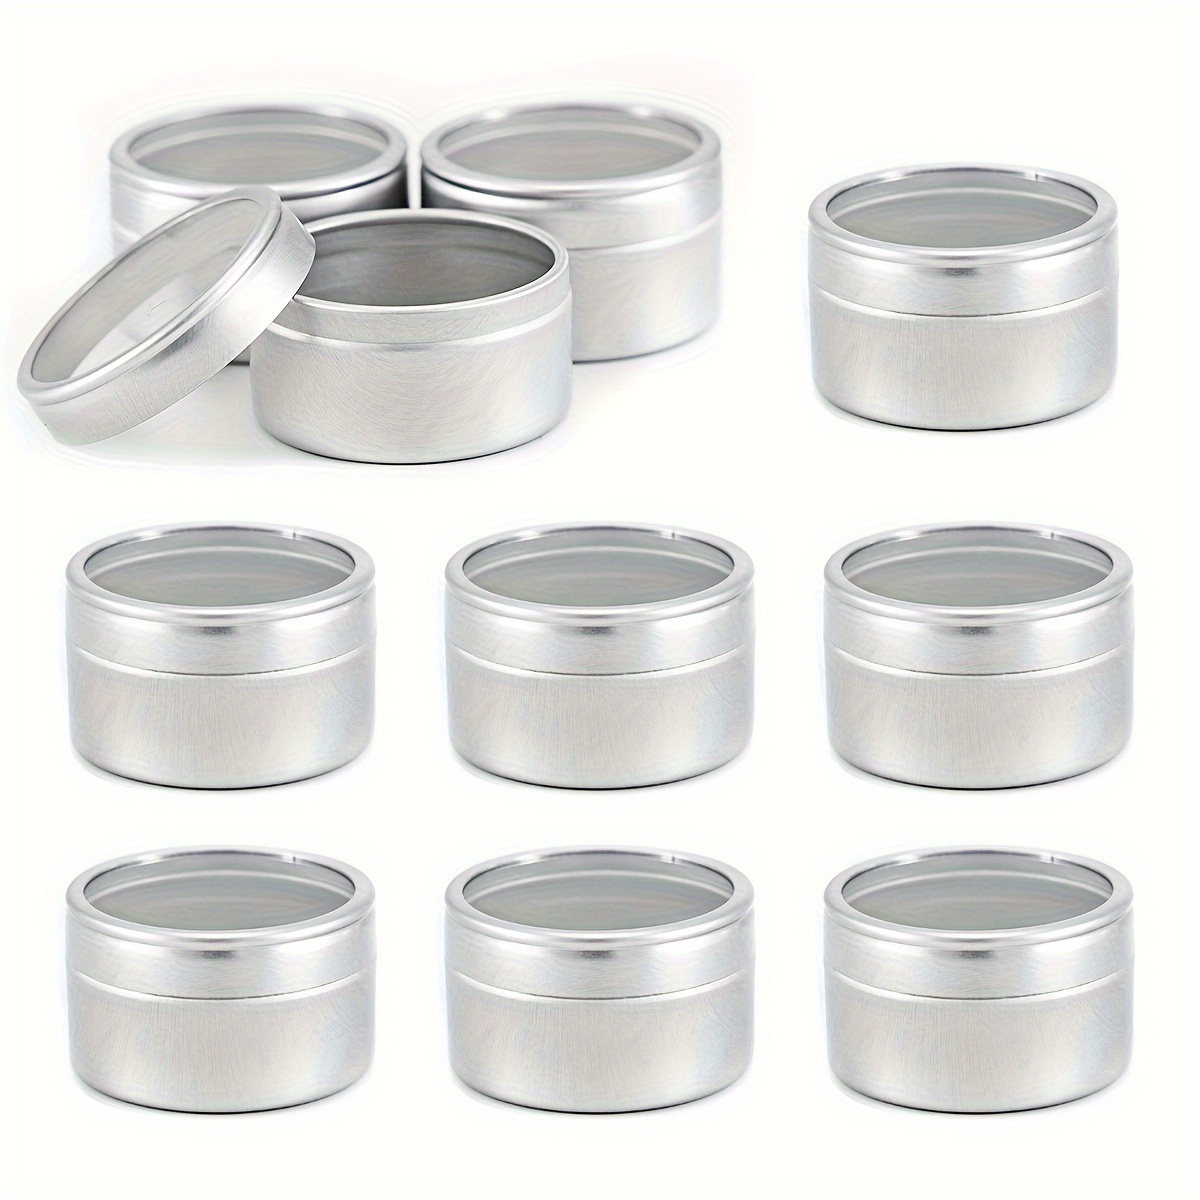 Metal Rectangular Empty Hinged Tins, Mini Portable Box Containers, Tin  Boxes with Hinged Lids, Small Tins for Storage Home Organizer - China Metal Tin  Cans and Metal Tin Container price